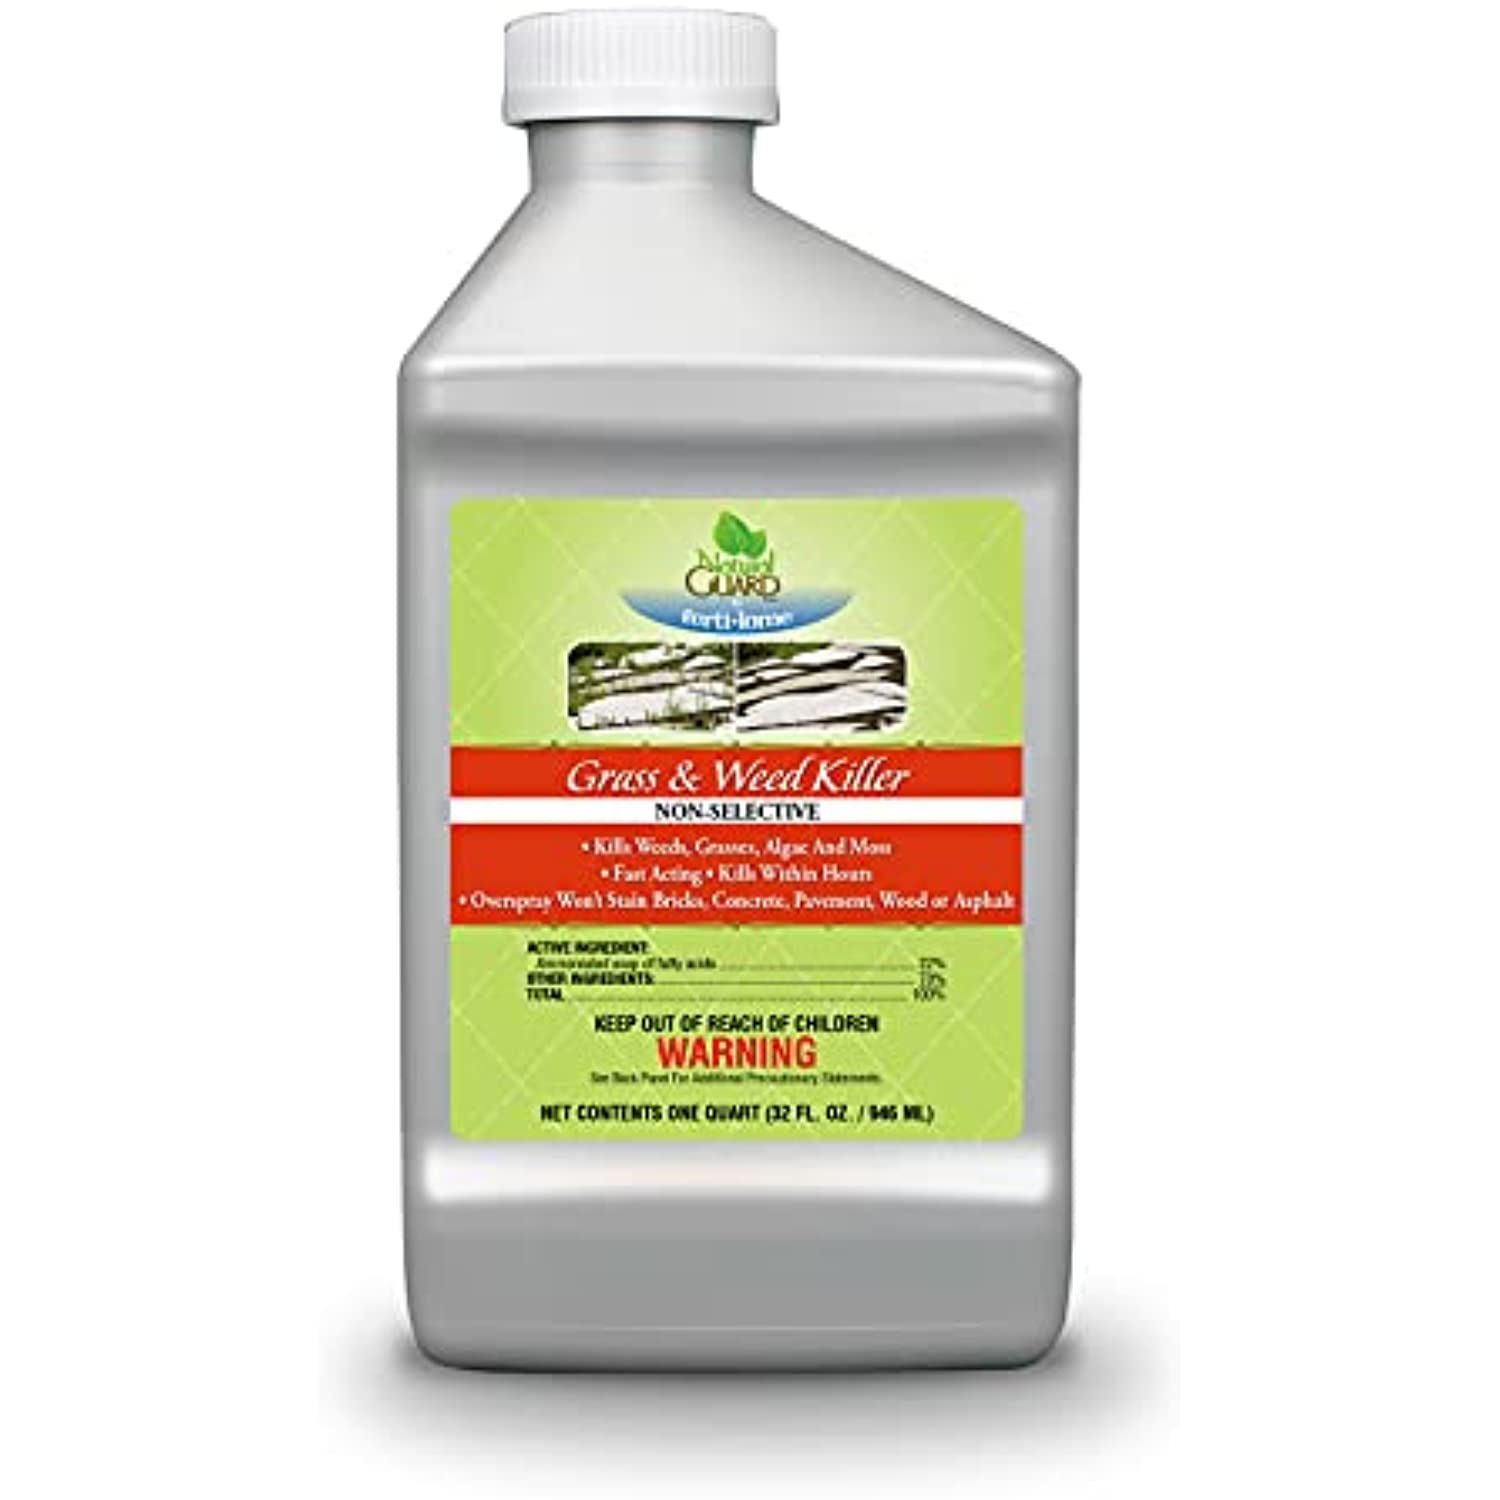 Ferti Lome Grass and Weed Killer 1 Quart Concentrated with Centaurus AZ Resistant Glove for General Home Lawns, Tough on Weeds, Algae, Moss, Organic, Fast-Acting Herbicide, and Non-Selective